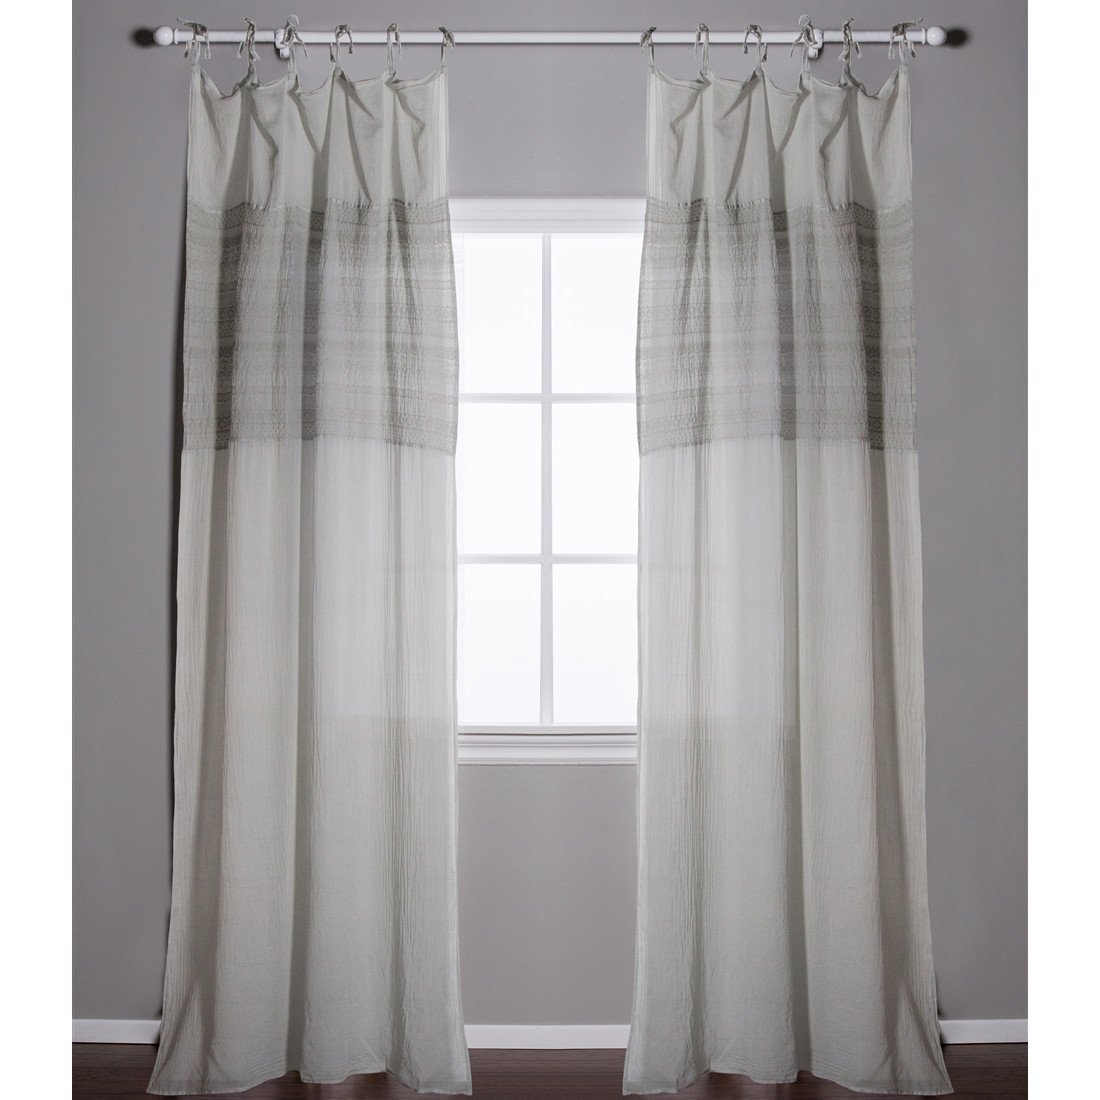 Olivia Curtain Panel by Pom at Home